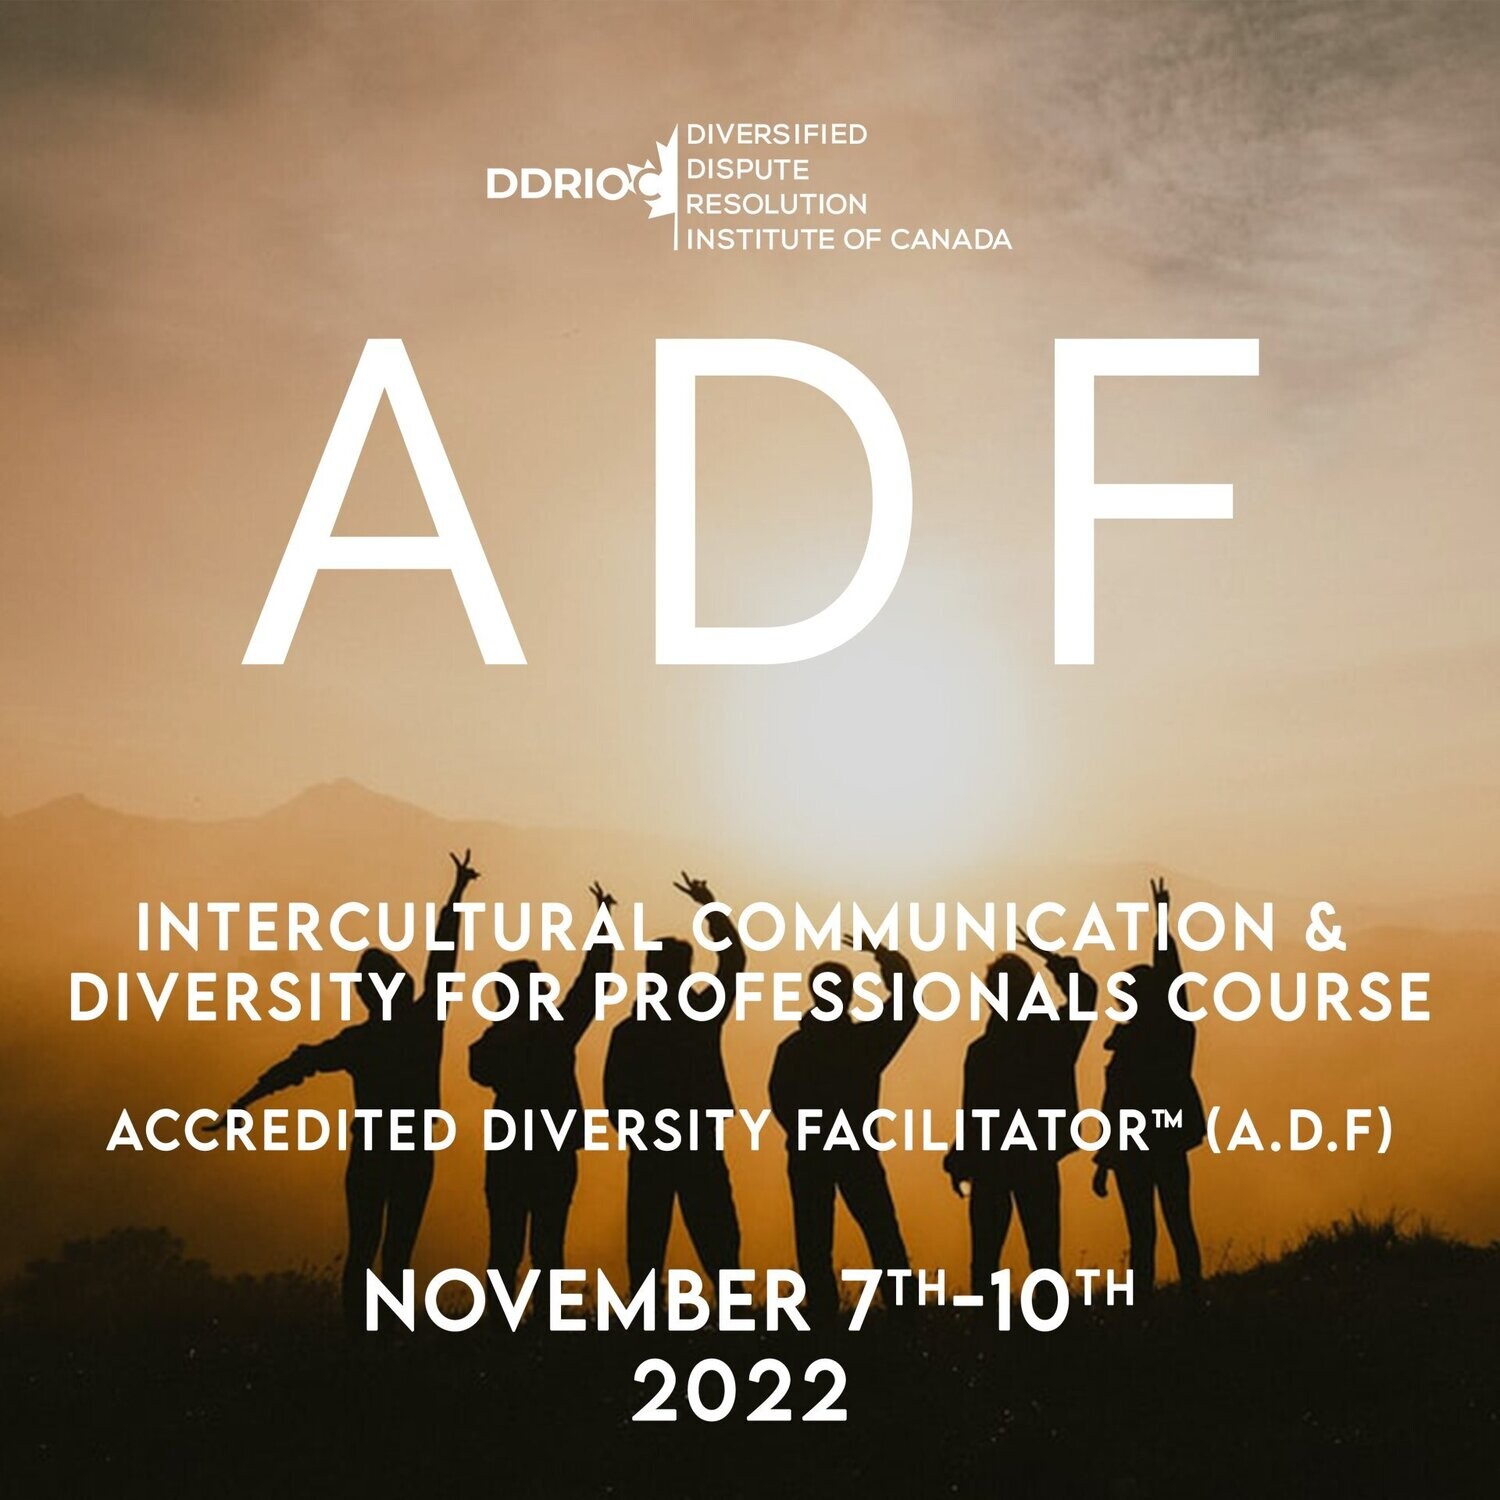 Intercultural Communication & Diversity for Professionals Course - Accredited Diversity Facilitator (A.D.F) Certification (7th November - 10th November, 2022)